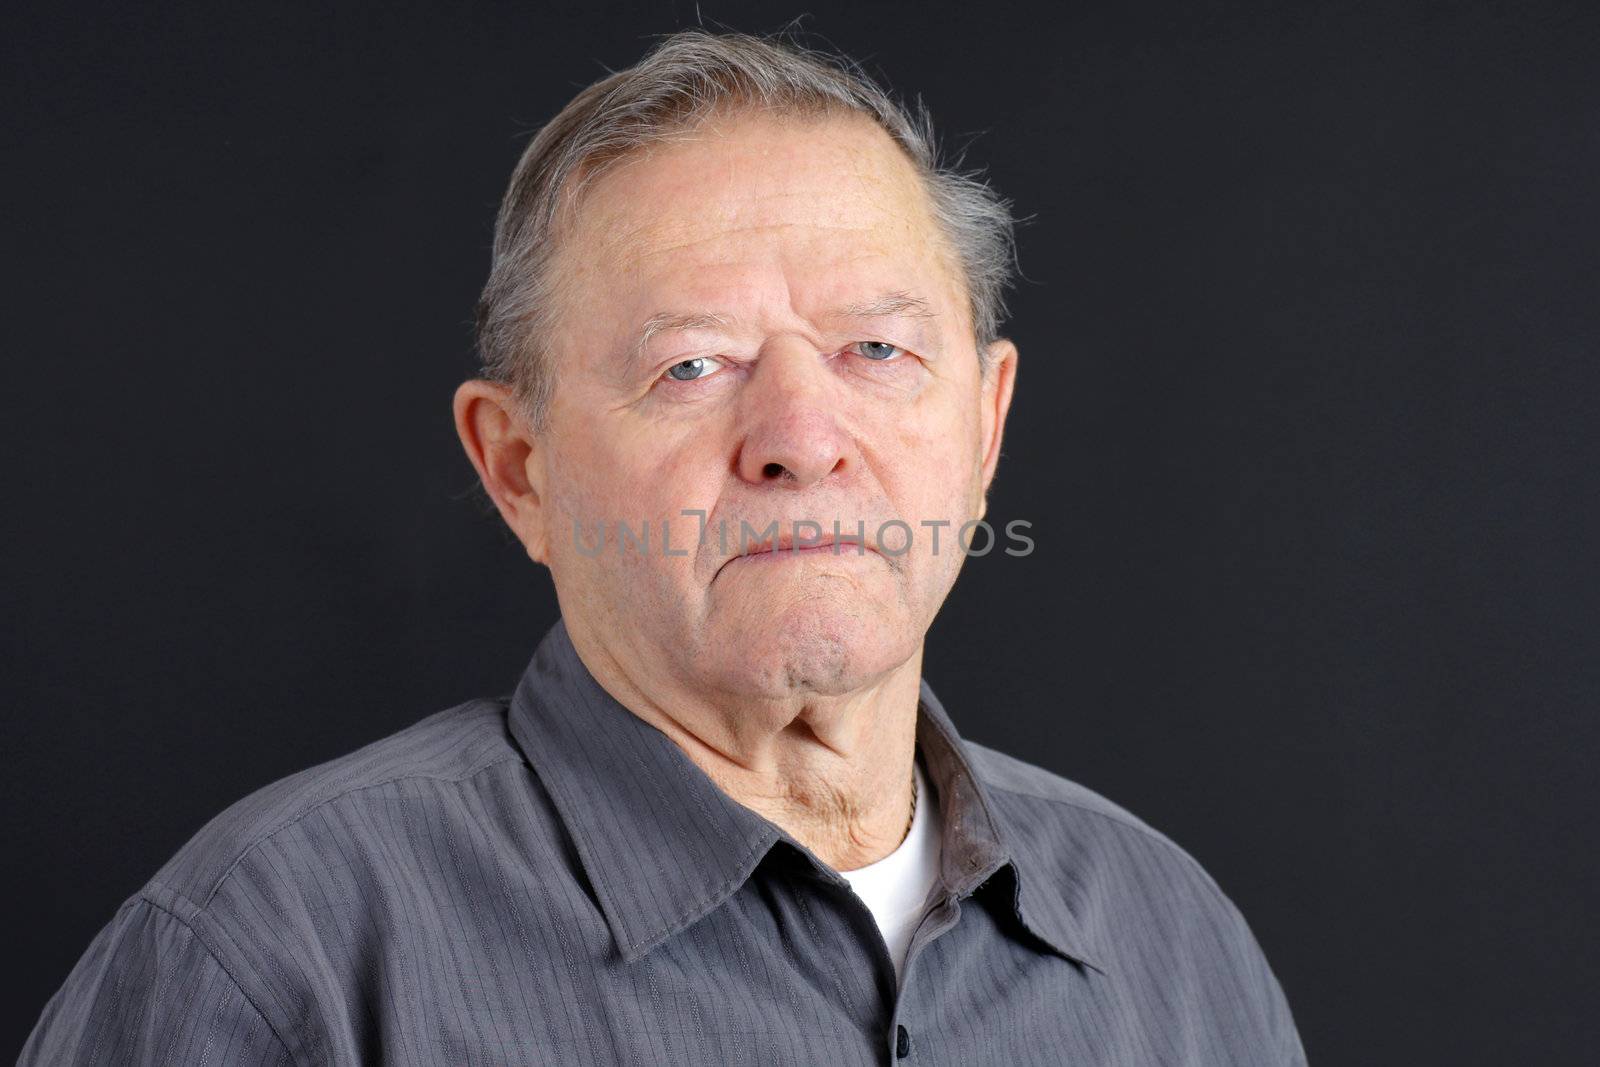 Portrait of a senior man looking very serious, sad or depressed looking at camera with blue eyes, great details, shot in studio over black.